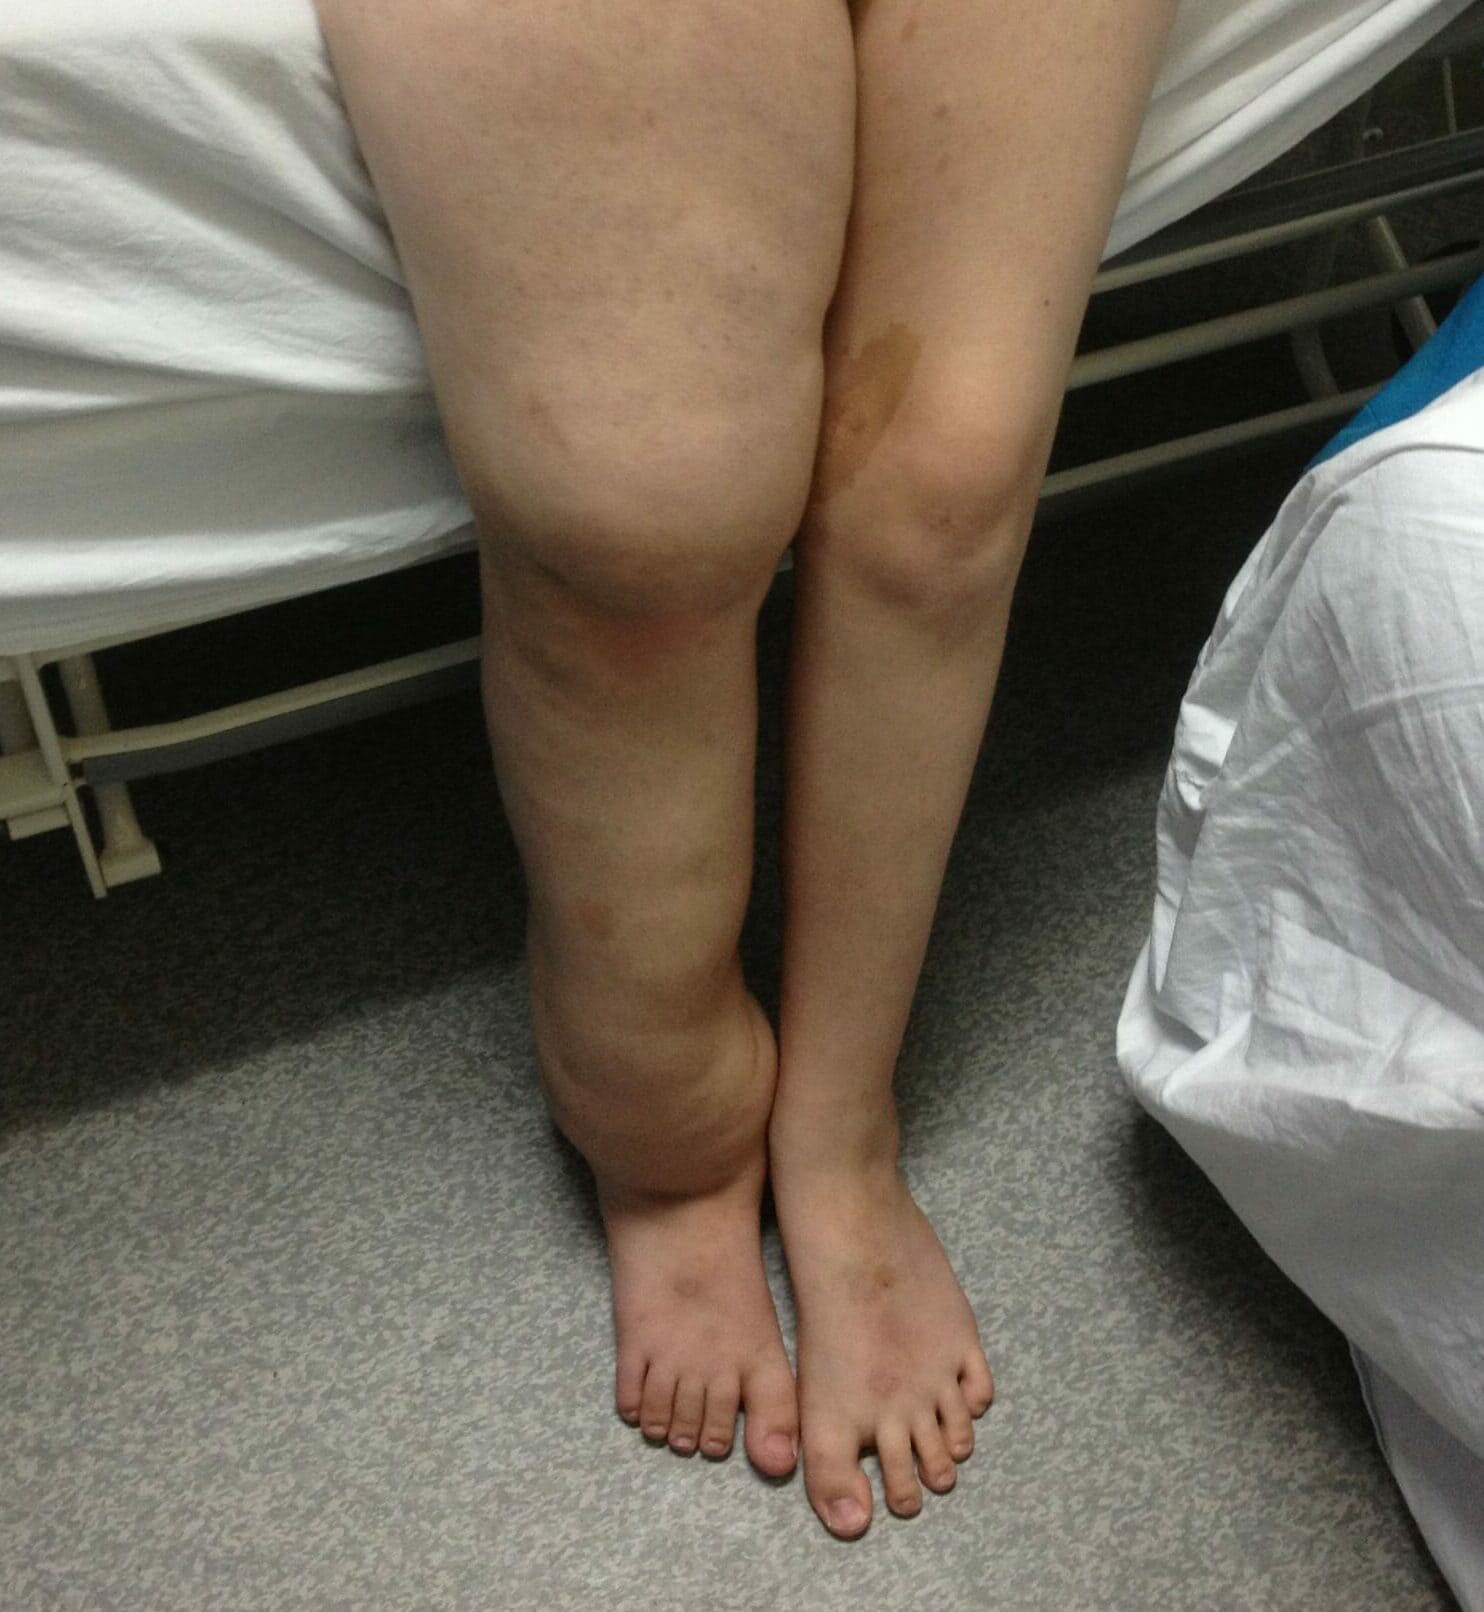 A pair of legs lean against a hospital bed. The right leg is extremely swollen and the left leg is of normal size.